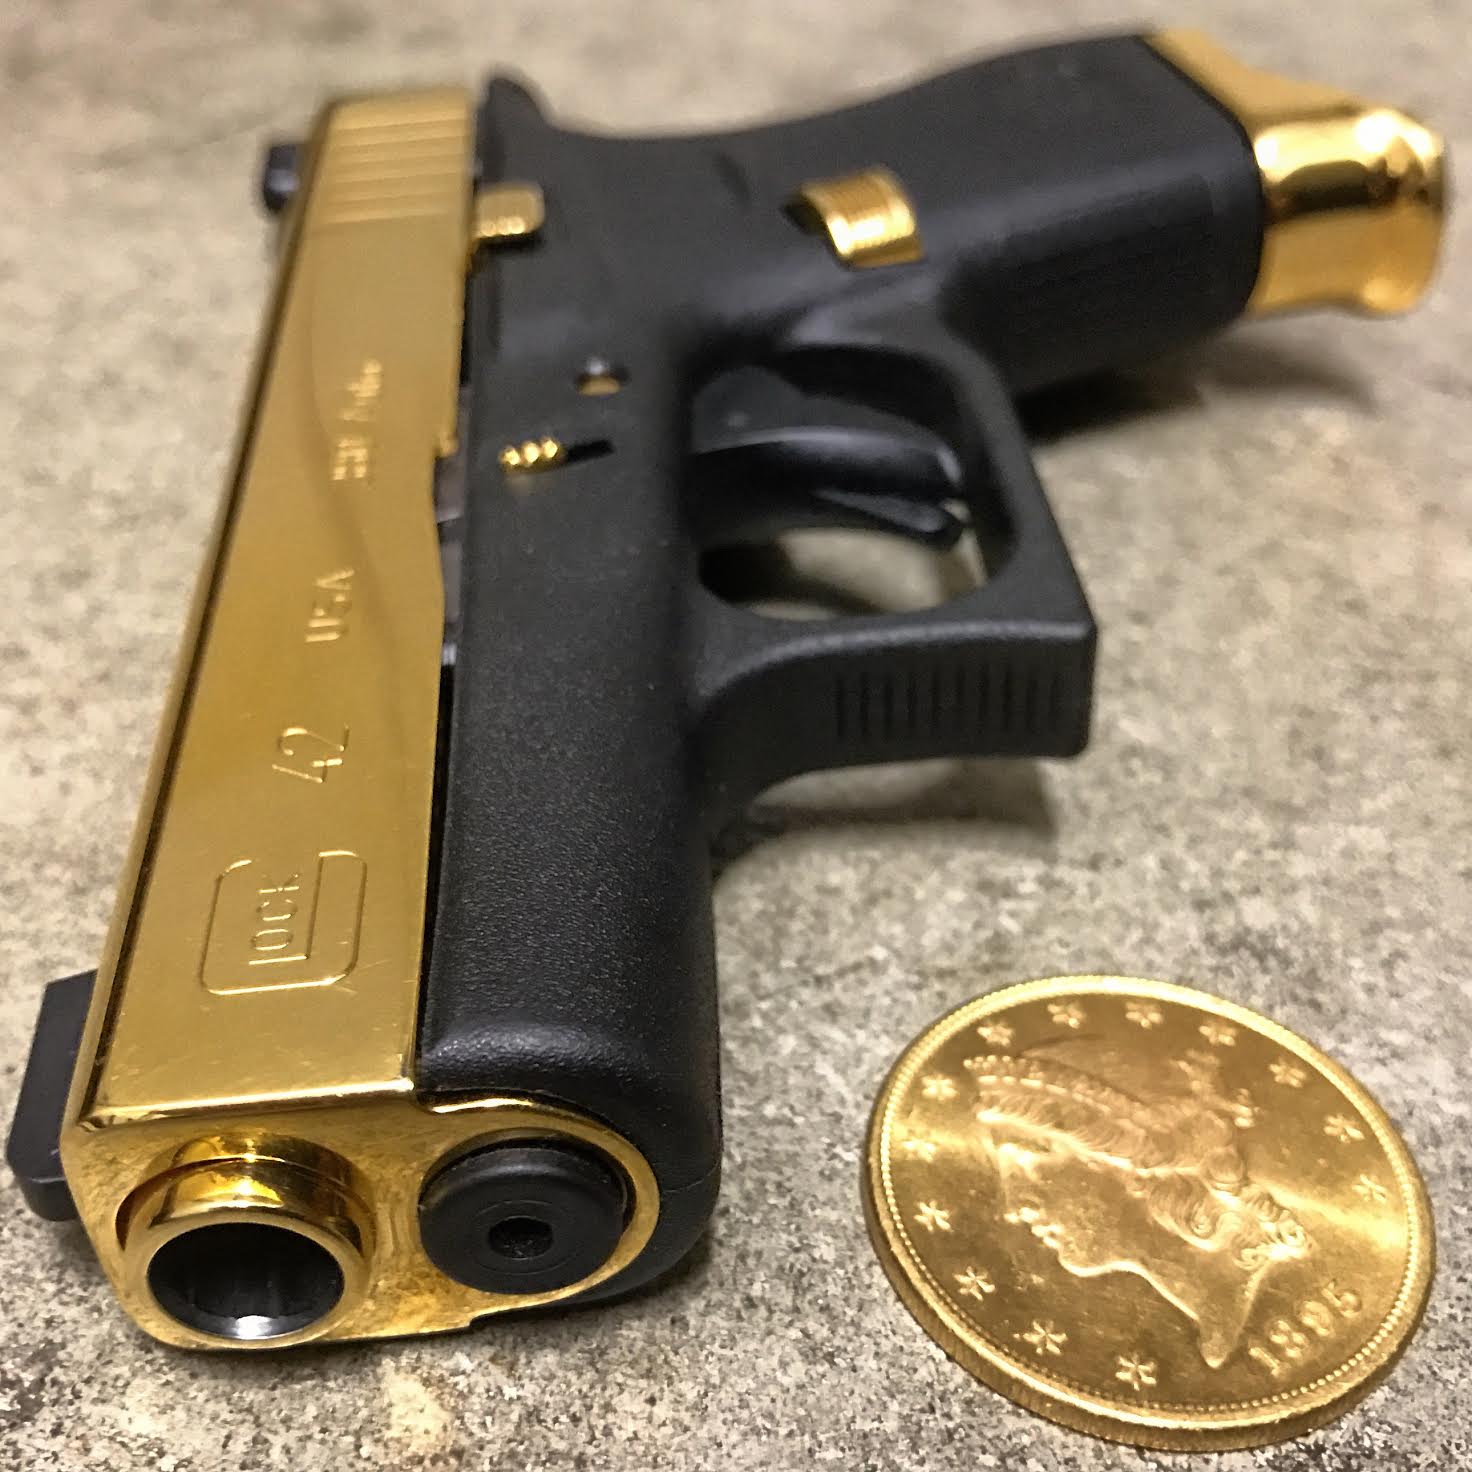 And for the REAL GOLD Glock Lovers. 